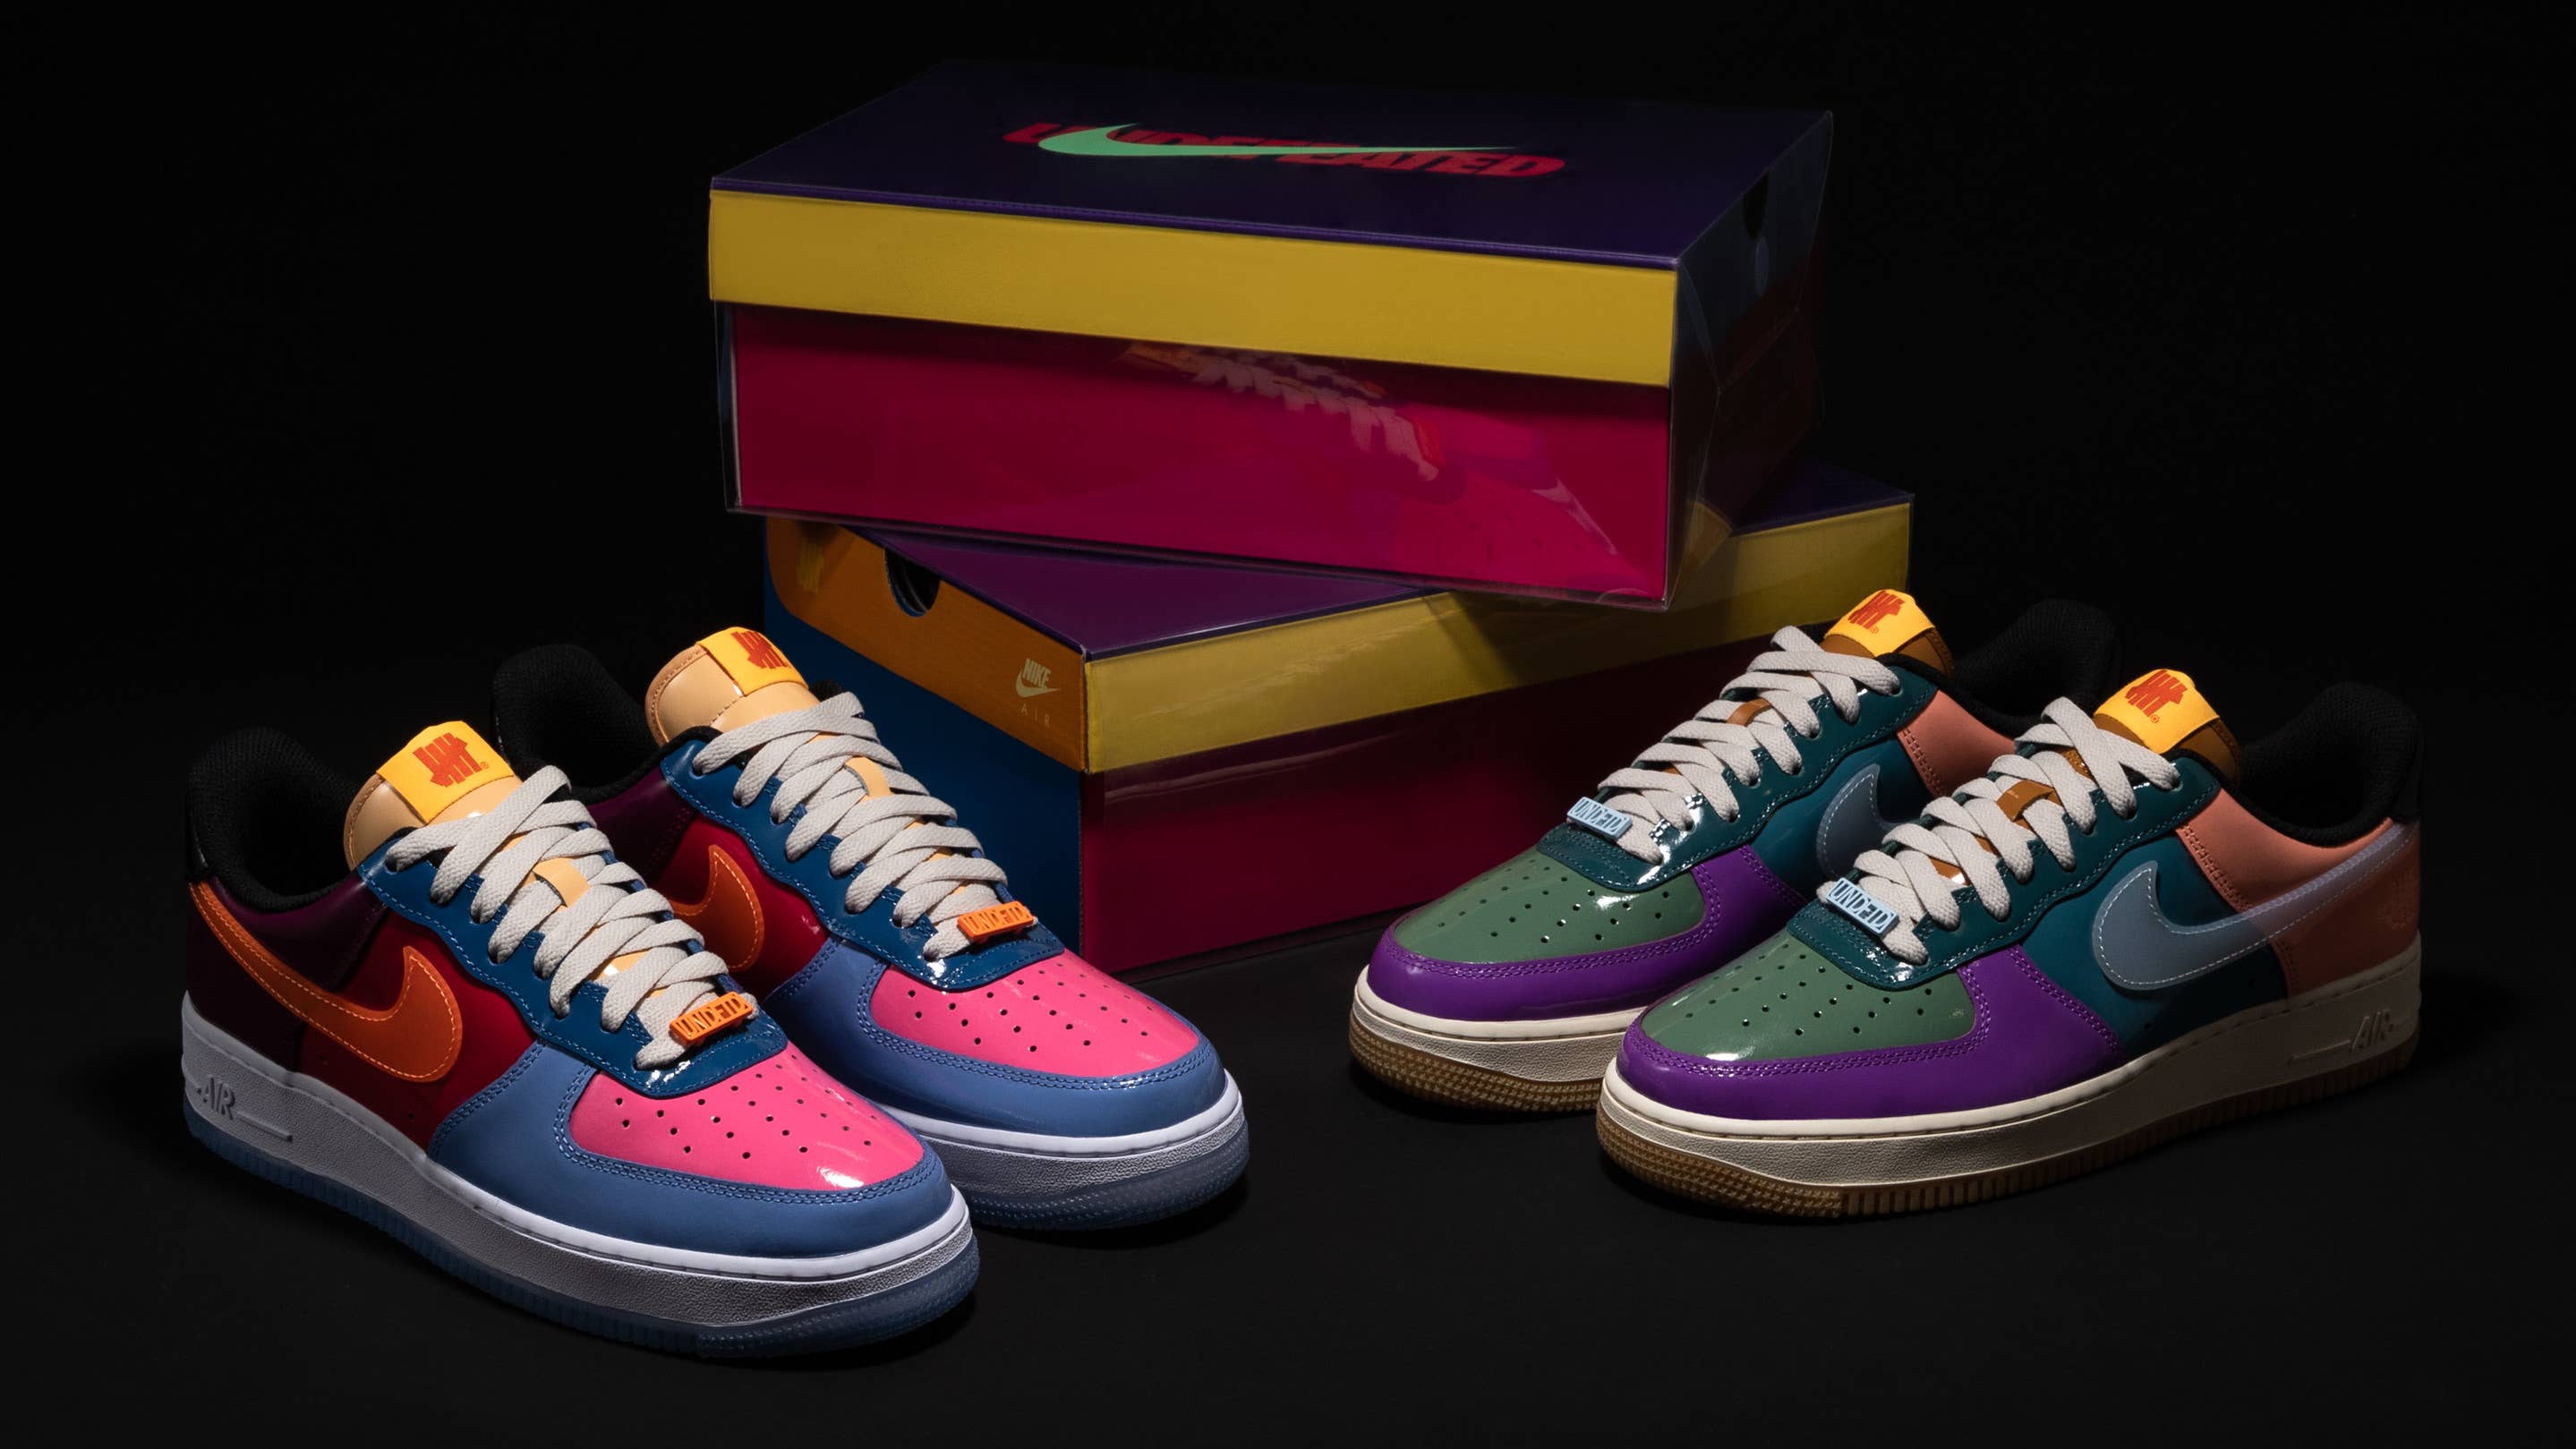 Two Undefeated x Nike Air Force 1 Colorways Drop This Week | Complex